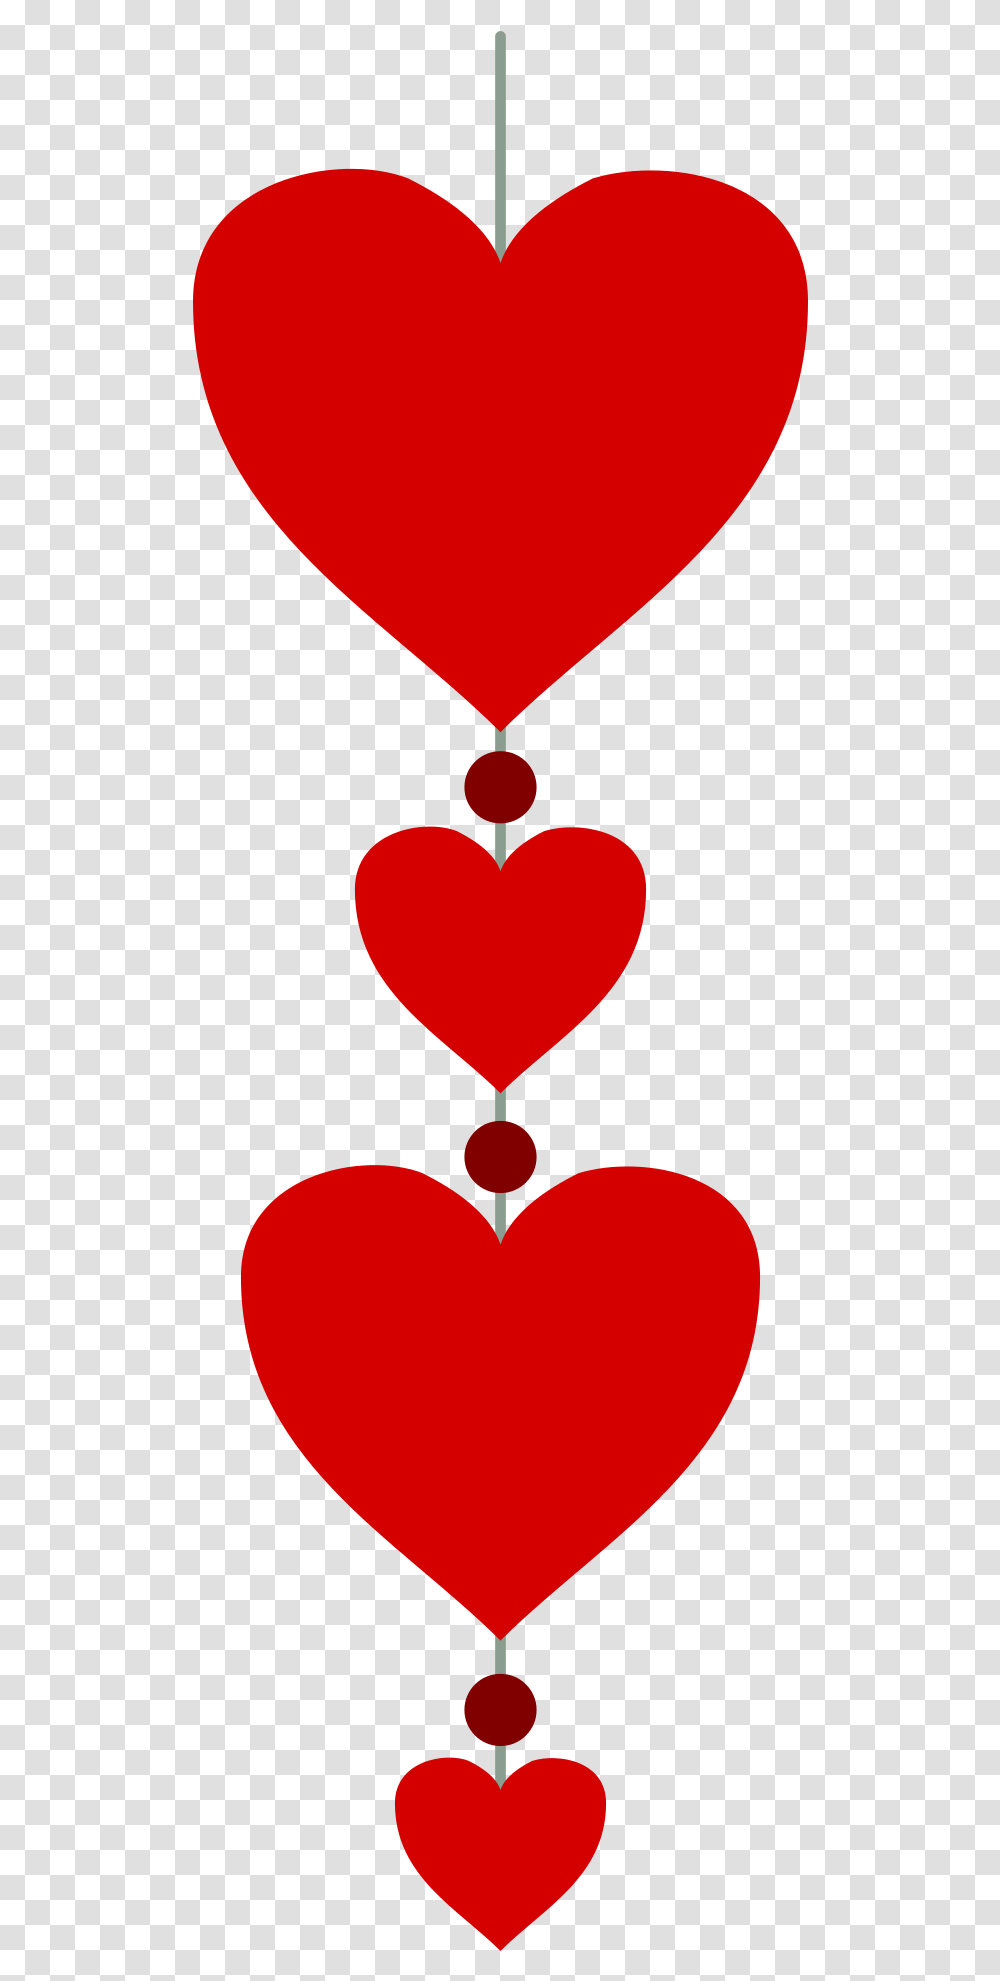 Hearts In A Vertical Line Image Vertical Line Of Hearts Transparent Png